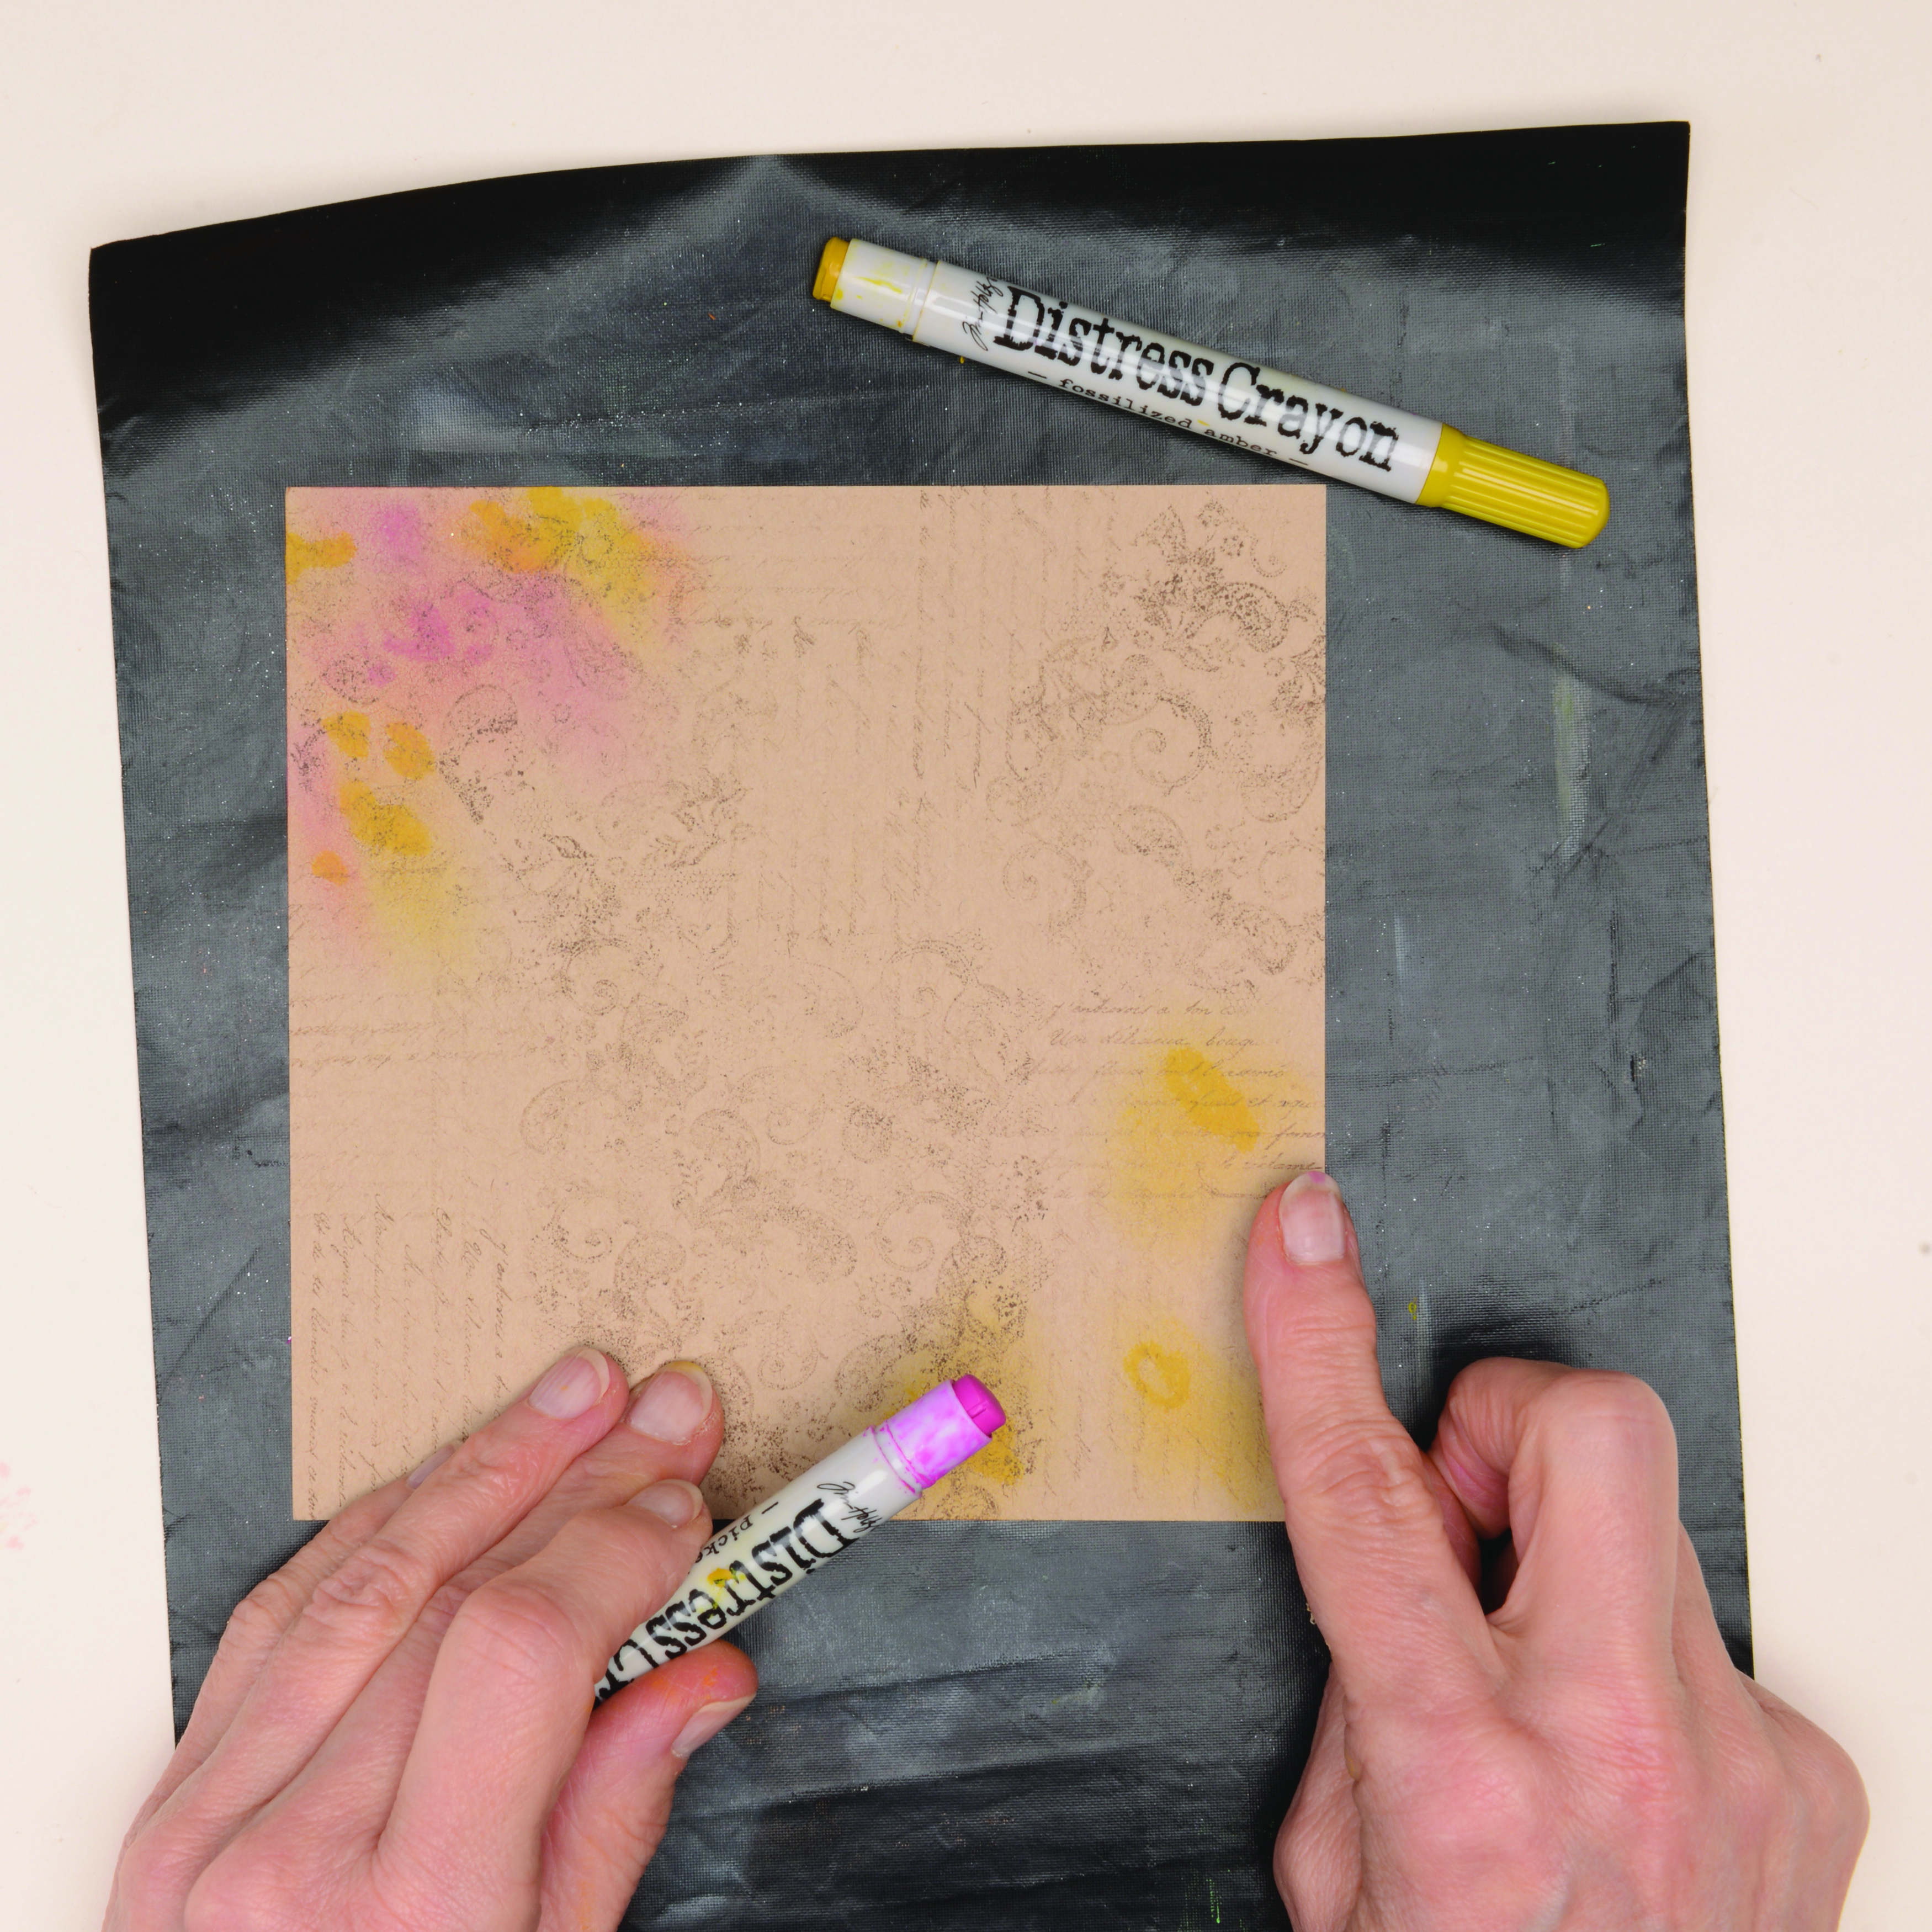 How to use Tim Holtz Distress Crayons – step 2